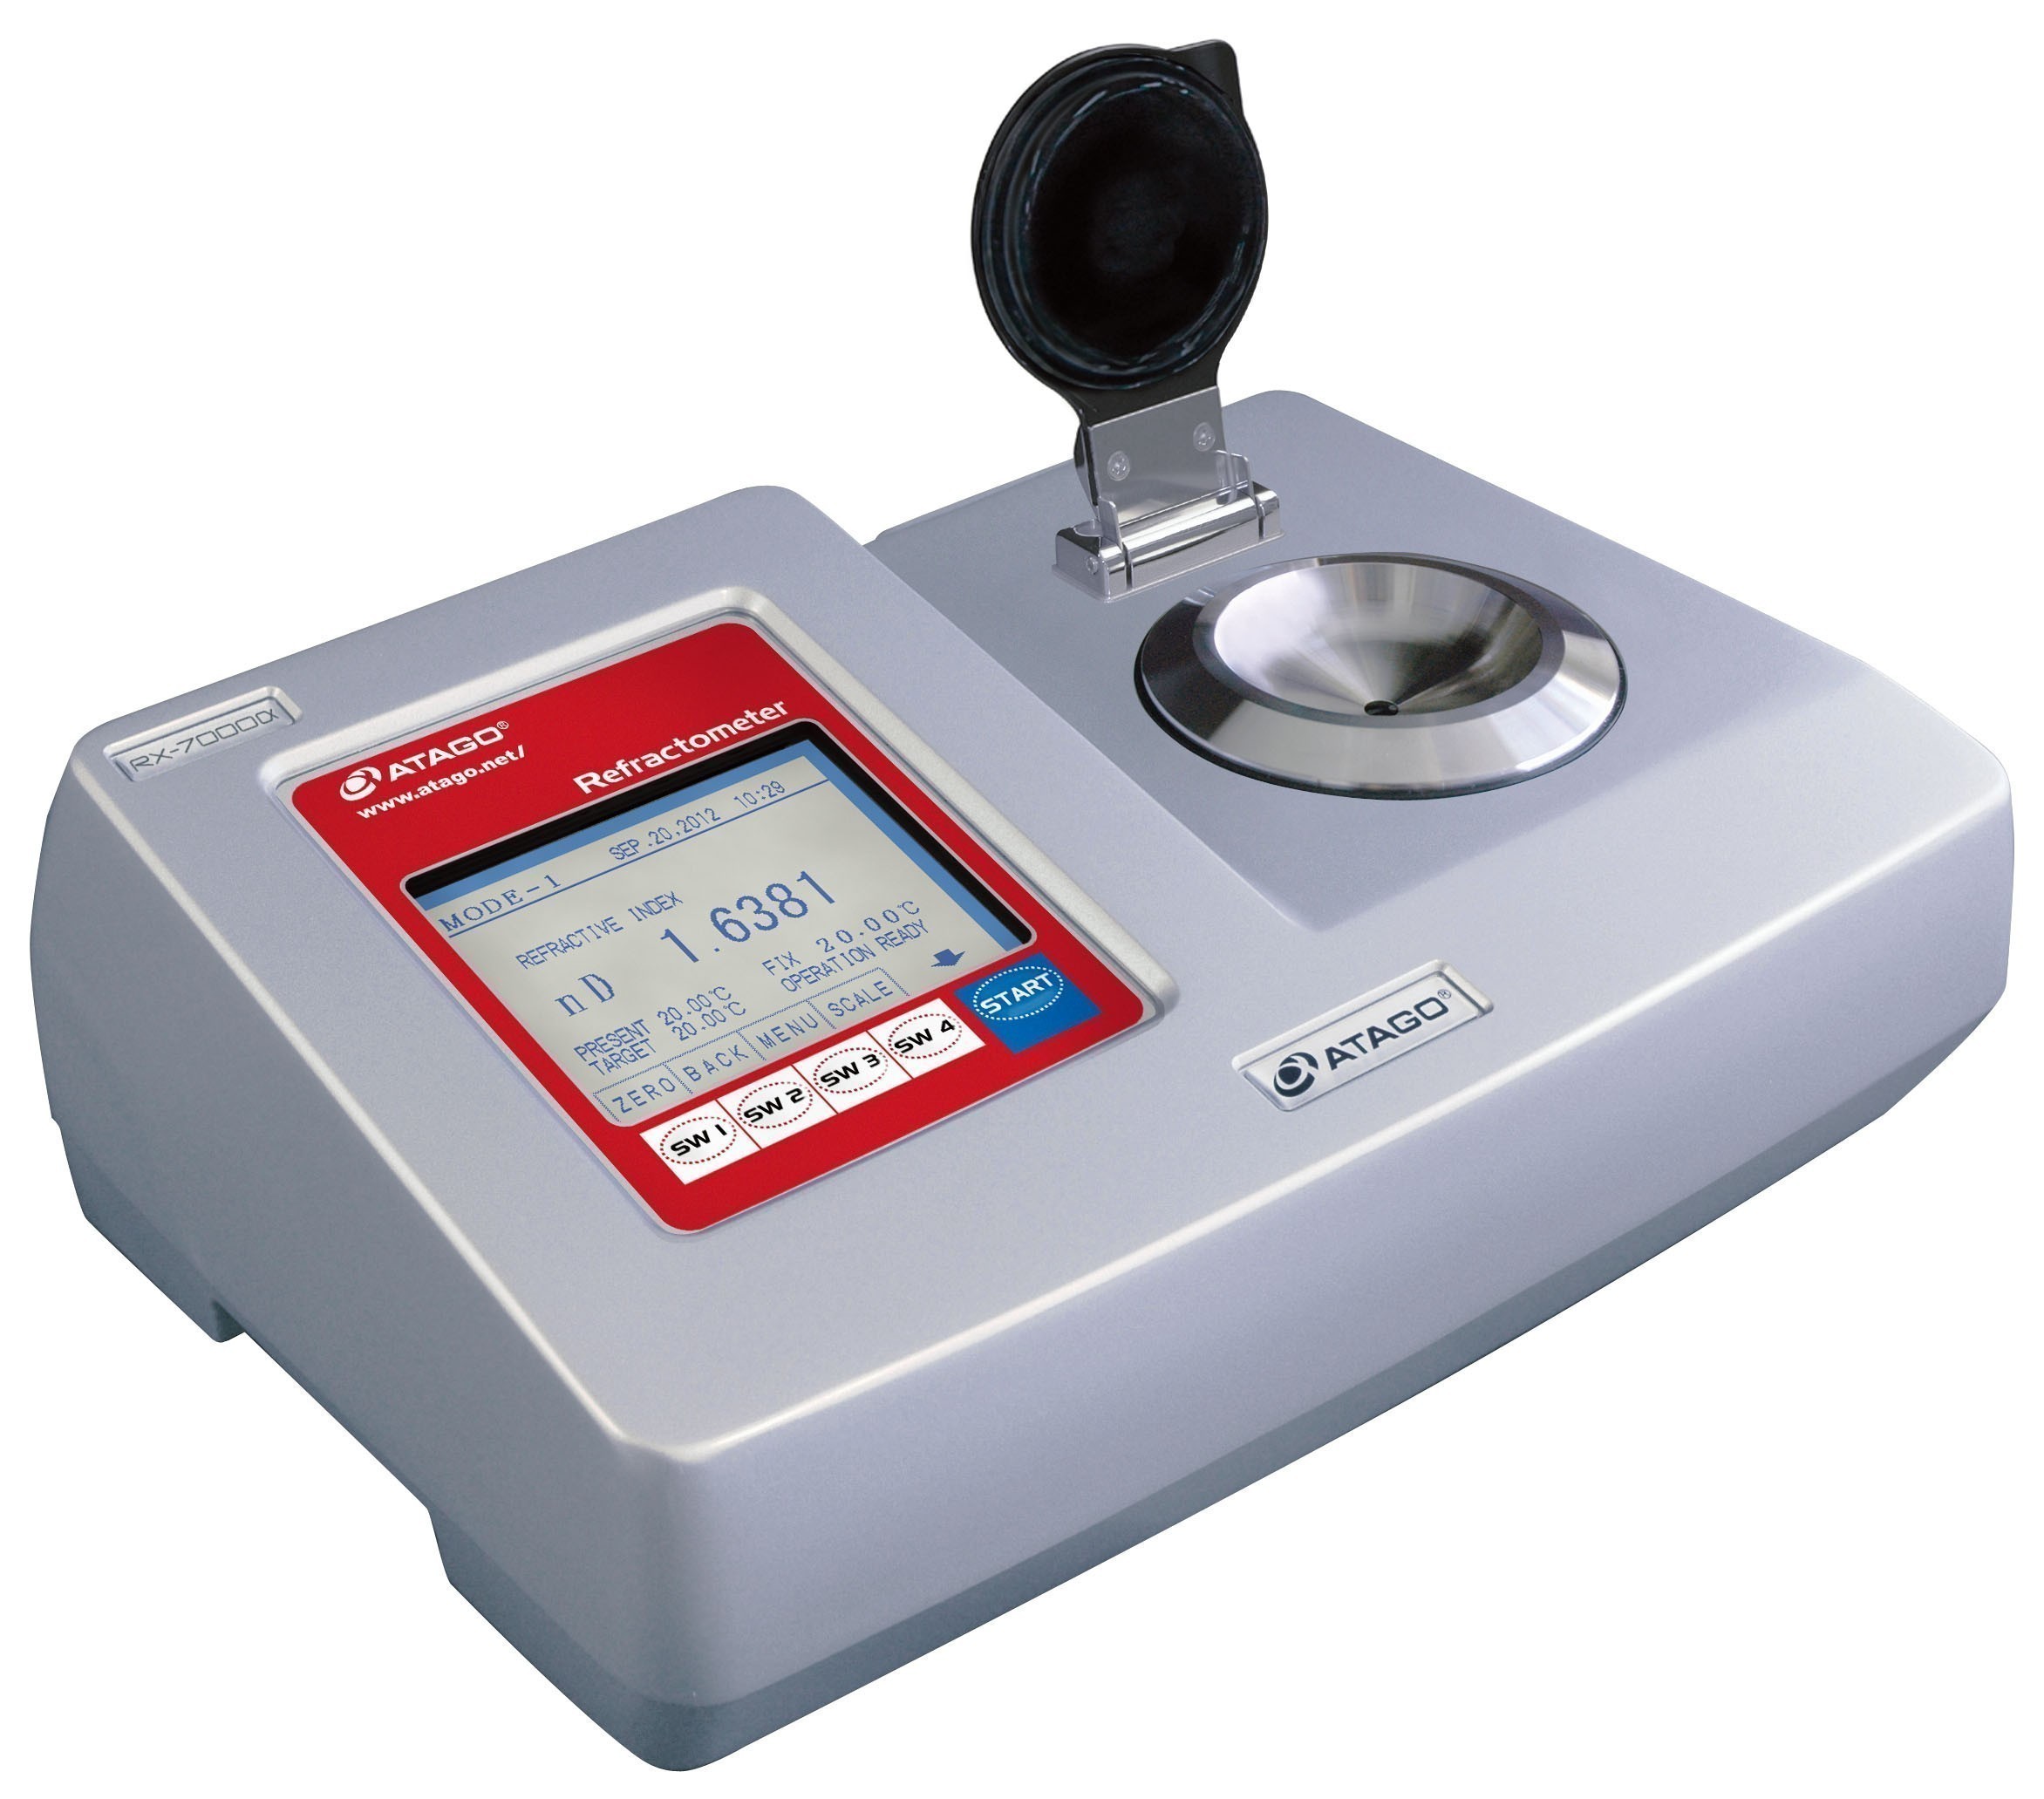 Atago 3262 RX-7000a Automatic Digital Bench-Top Refractometers, Refractive index (nD) : 1.32500 to 1.70000, Brix : 0.00 to 100.00% Measurement Range